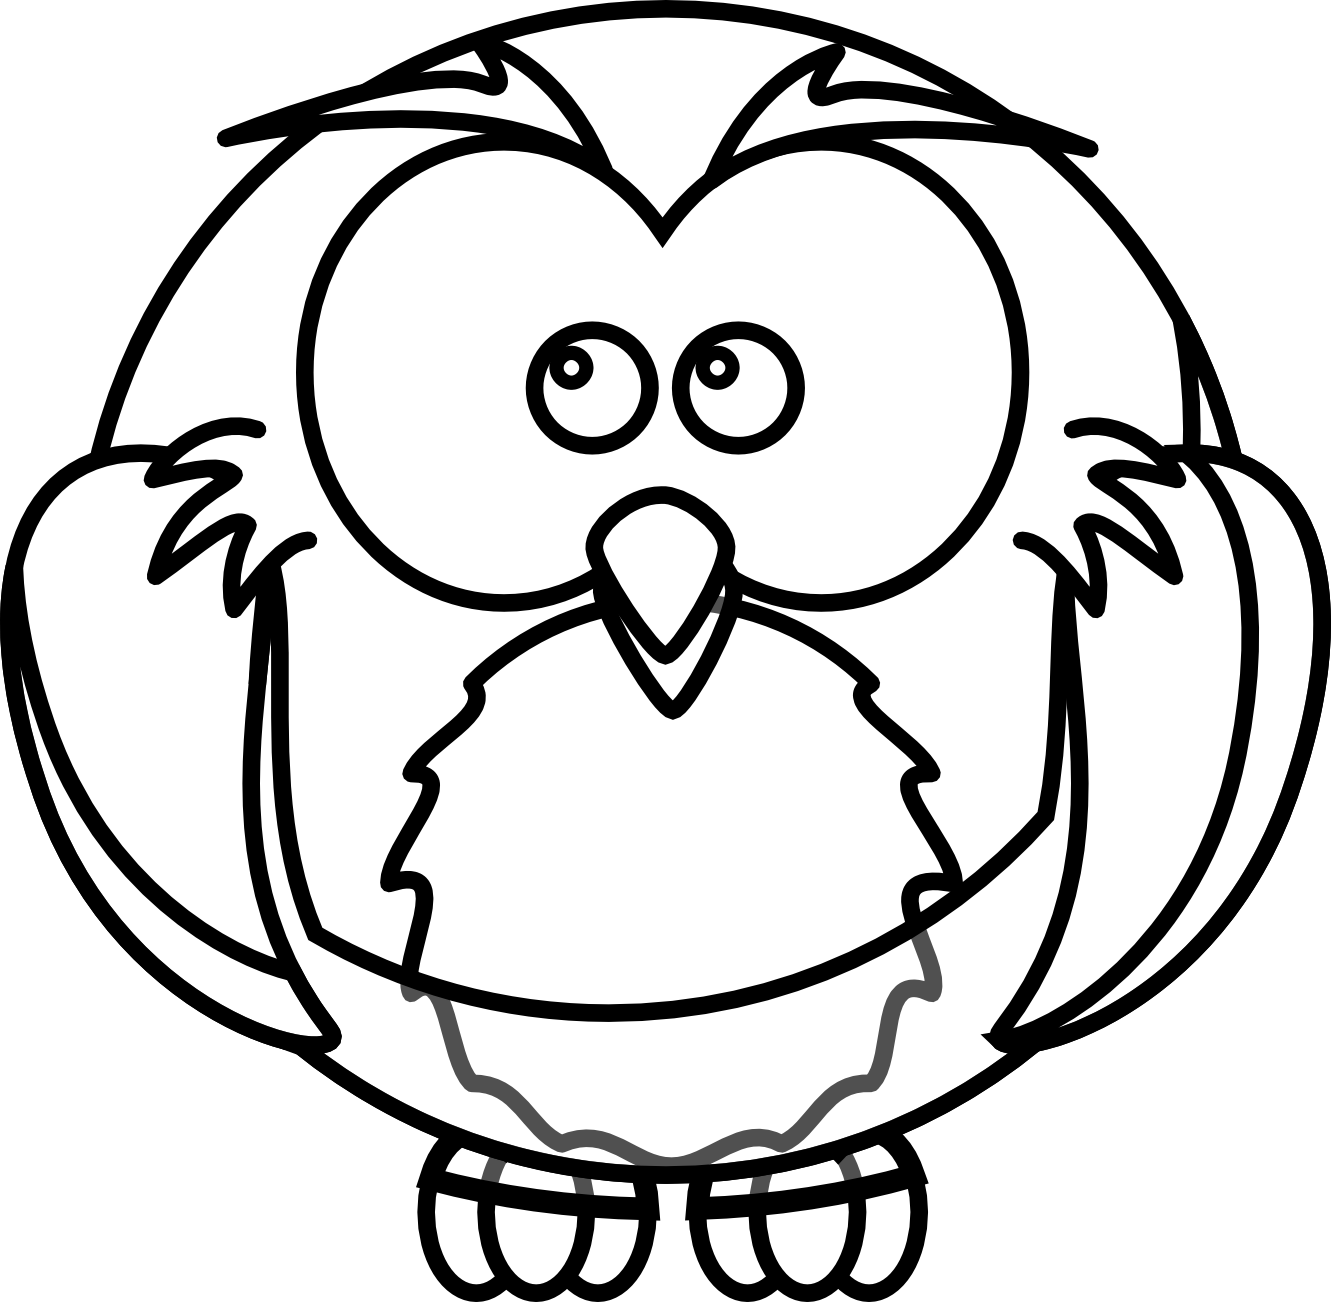 Owl body black and white clipart 